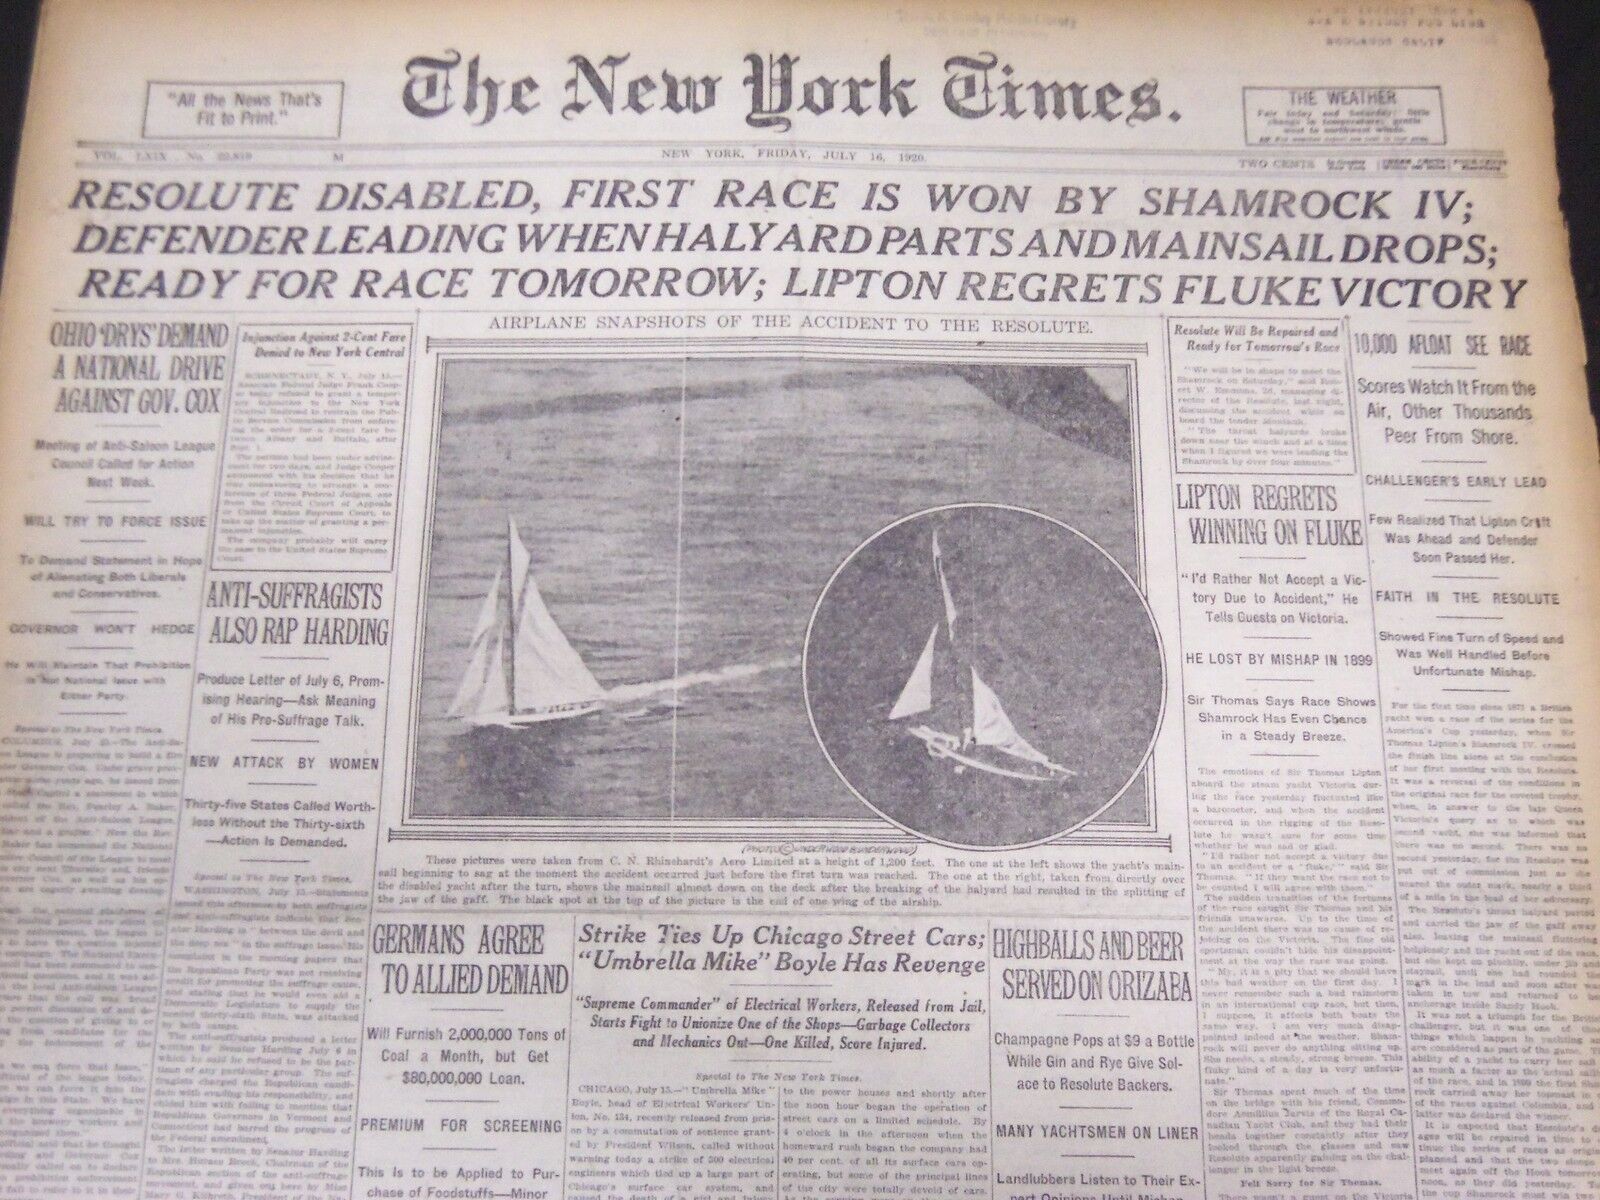 1920 JULY 16 NEW YORK TIMES - RESOLUTE DISABLED, SHAMROCK WON RACE - NT 5368